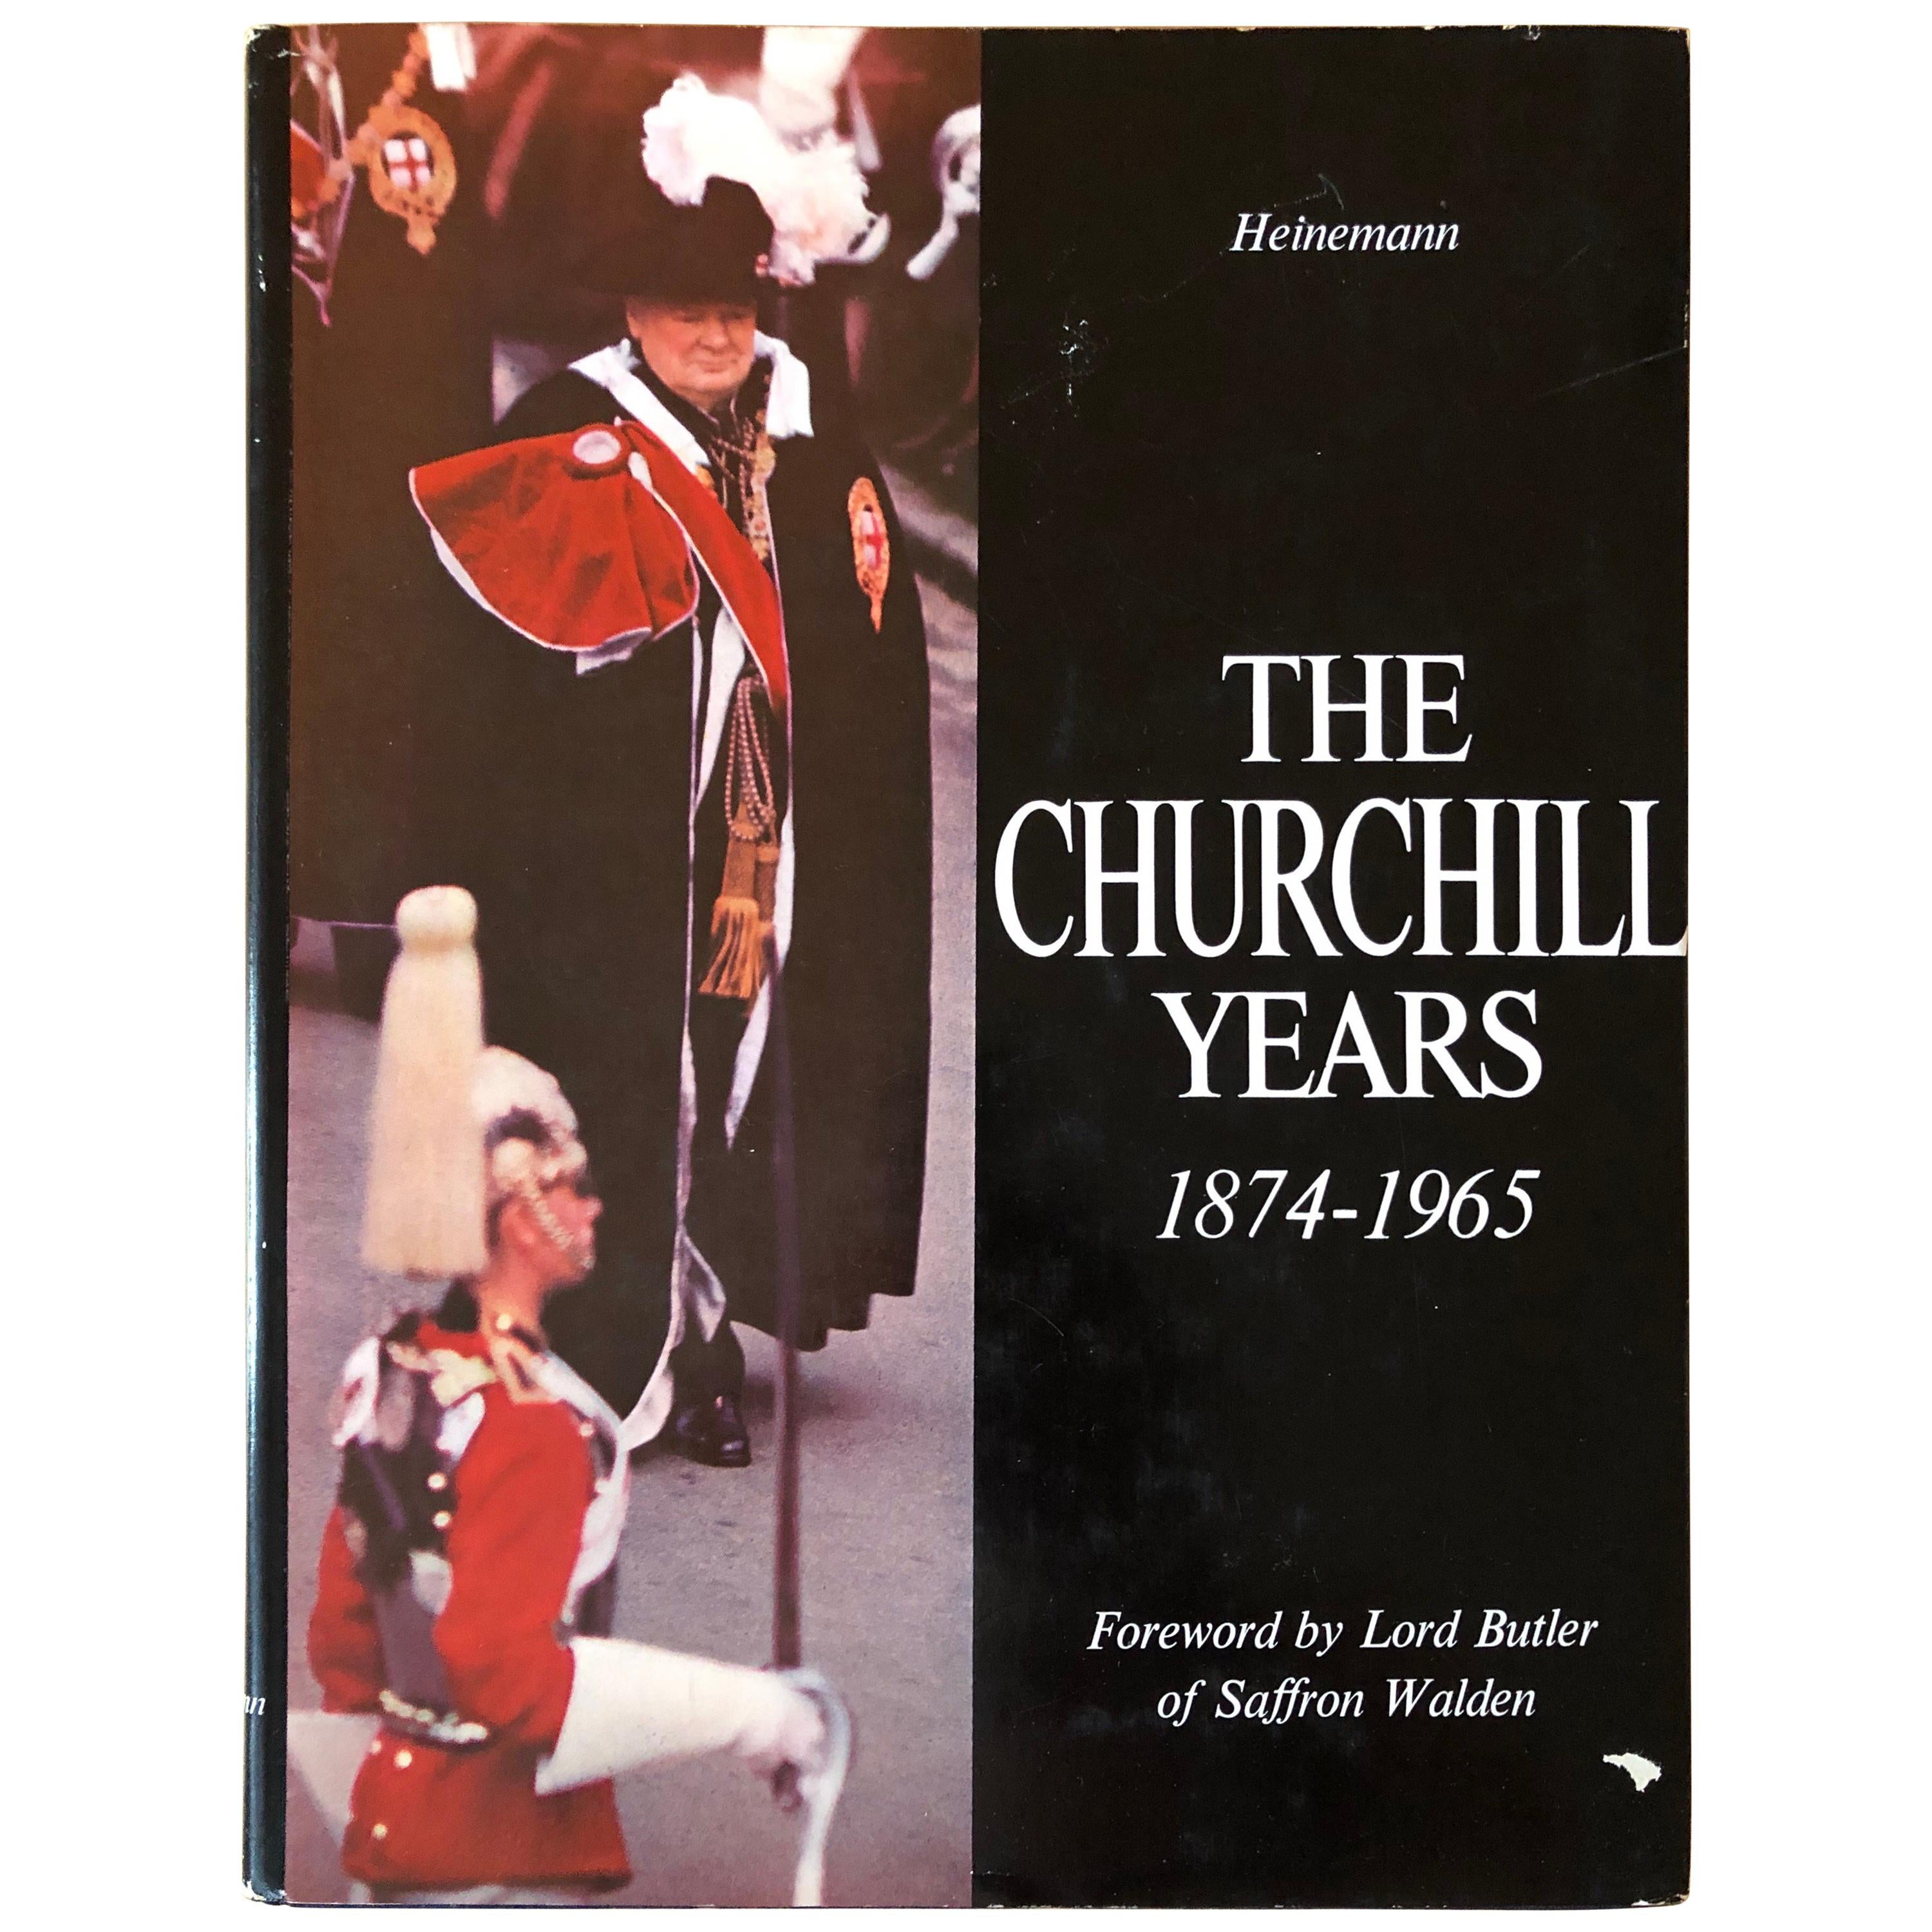 The Churchill Years 1874-1965 Text By The Times of London, Lord Butler SALE 